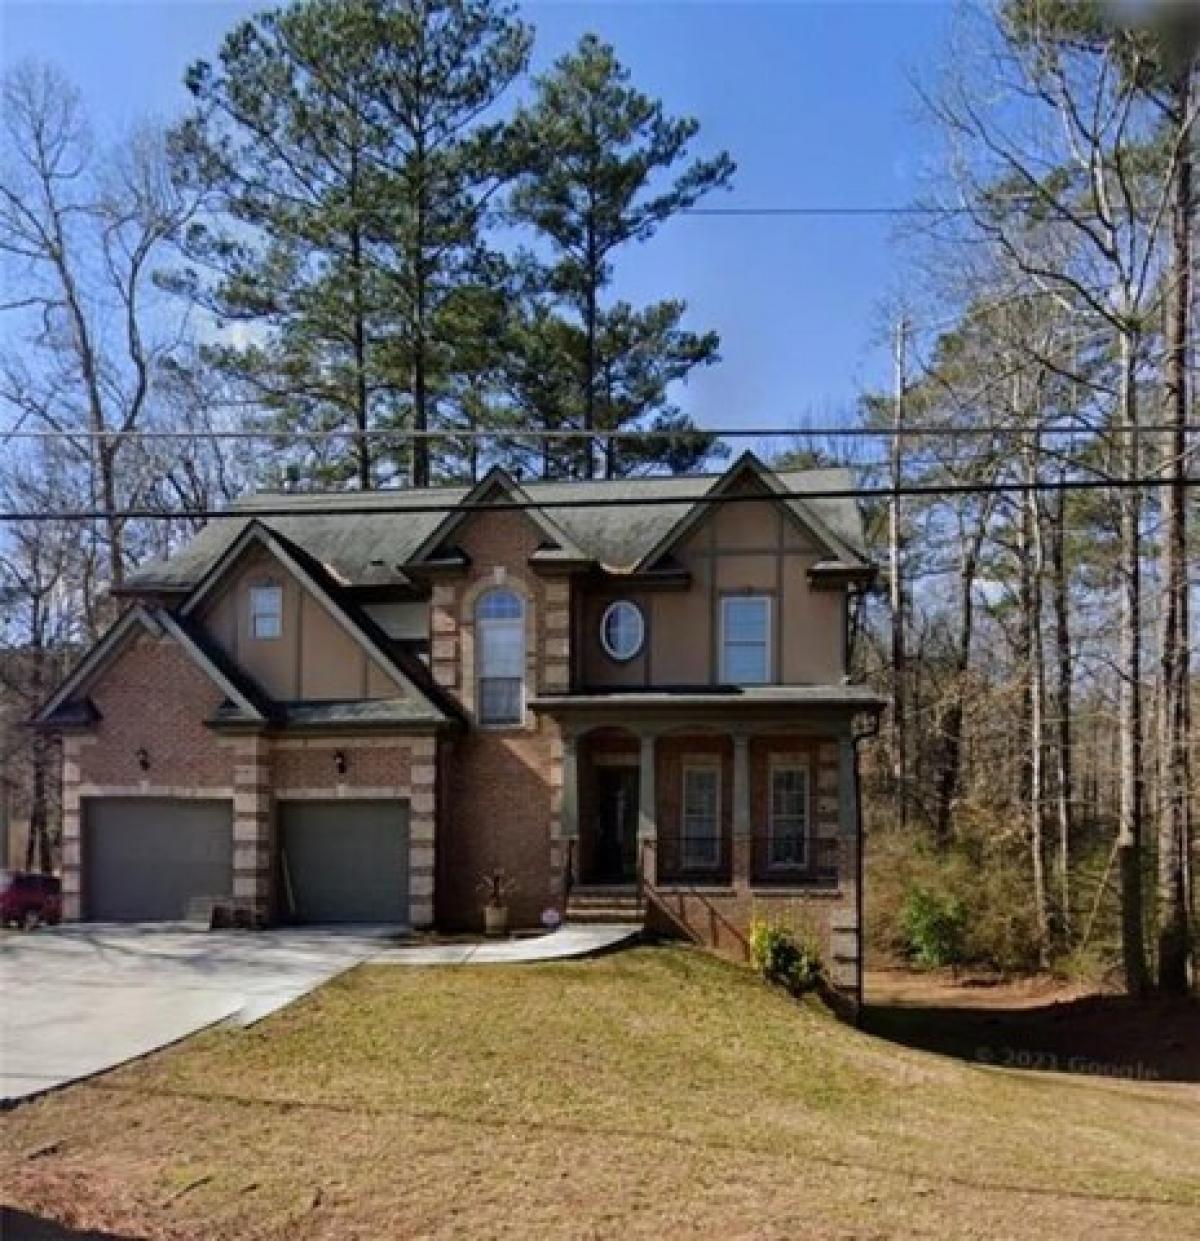 Picture of Home For Sale in Rex, Georgia, United States